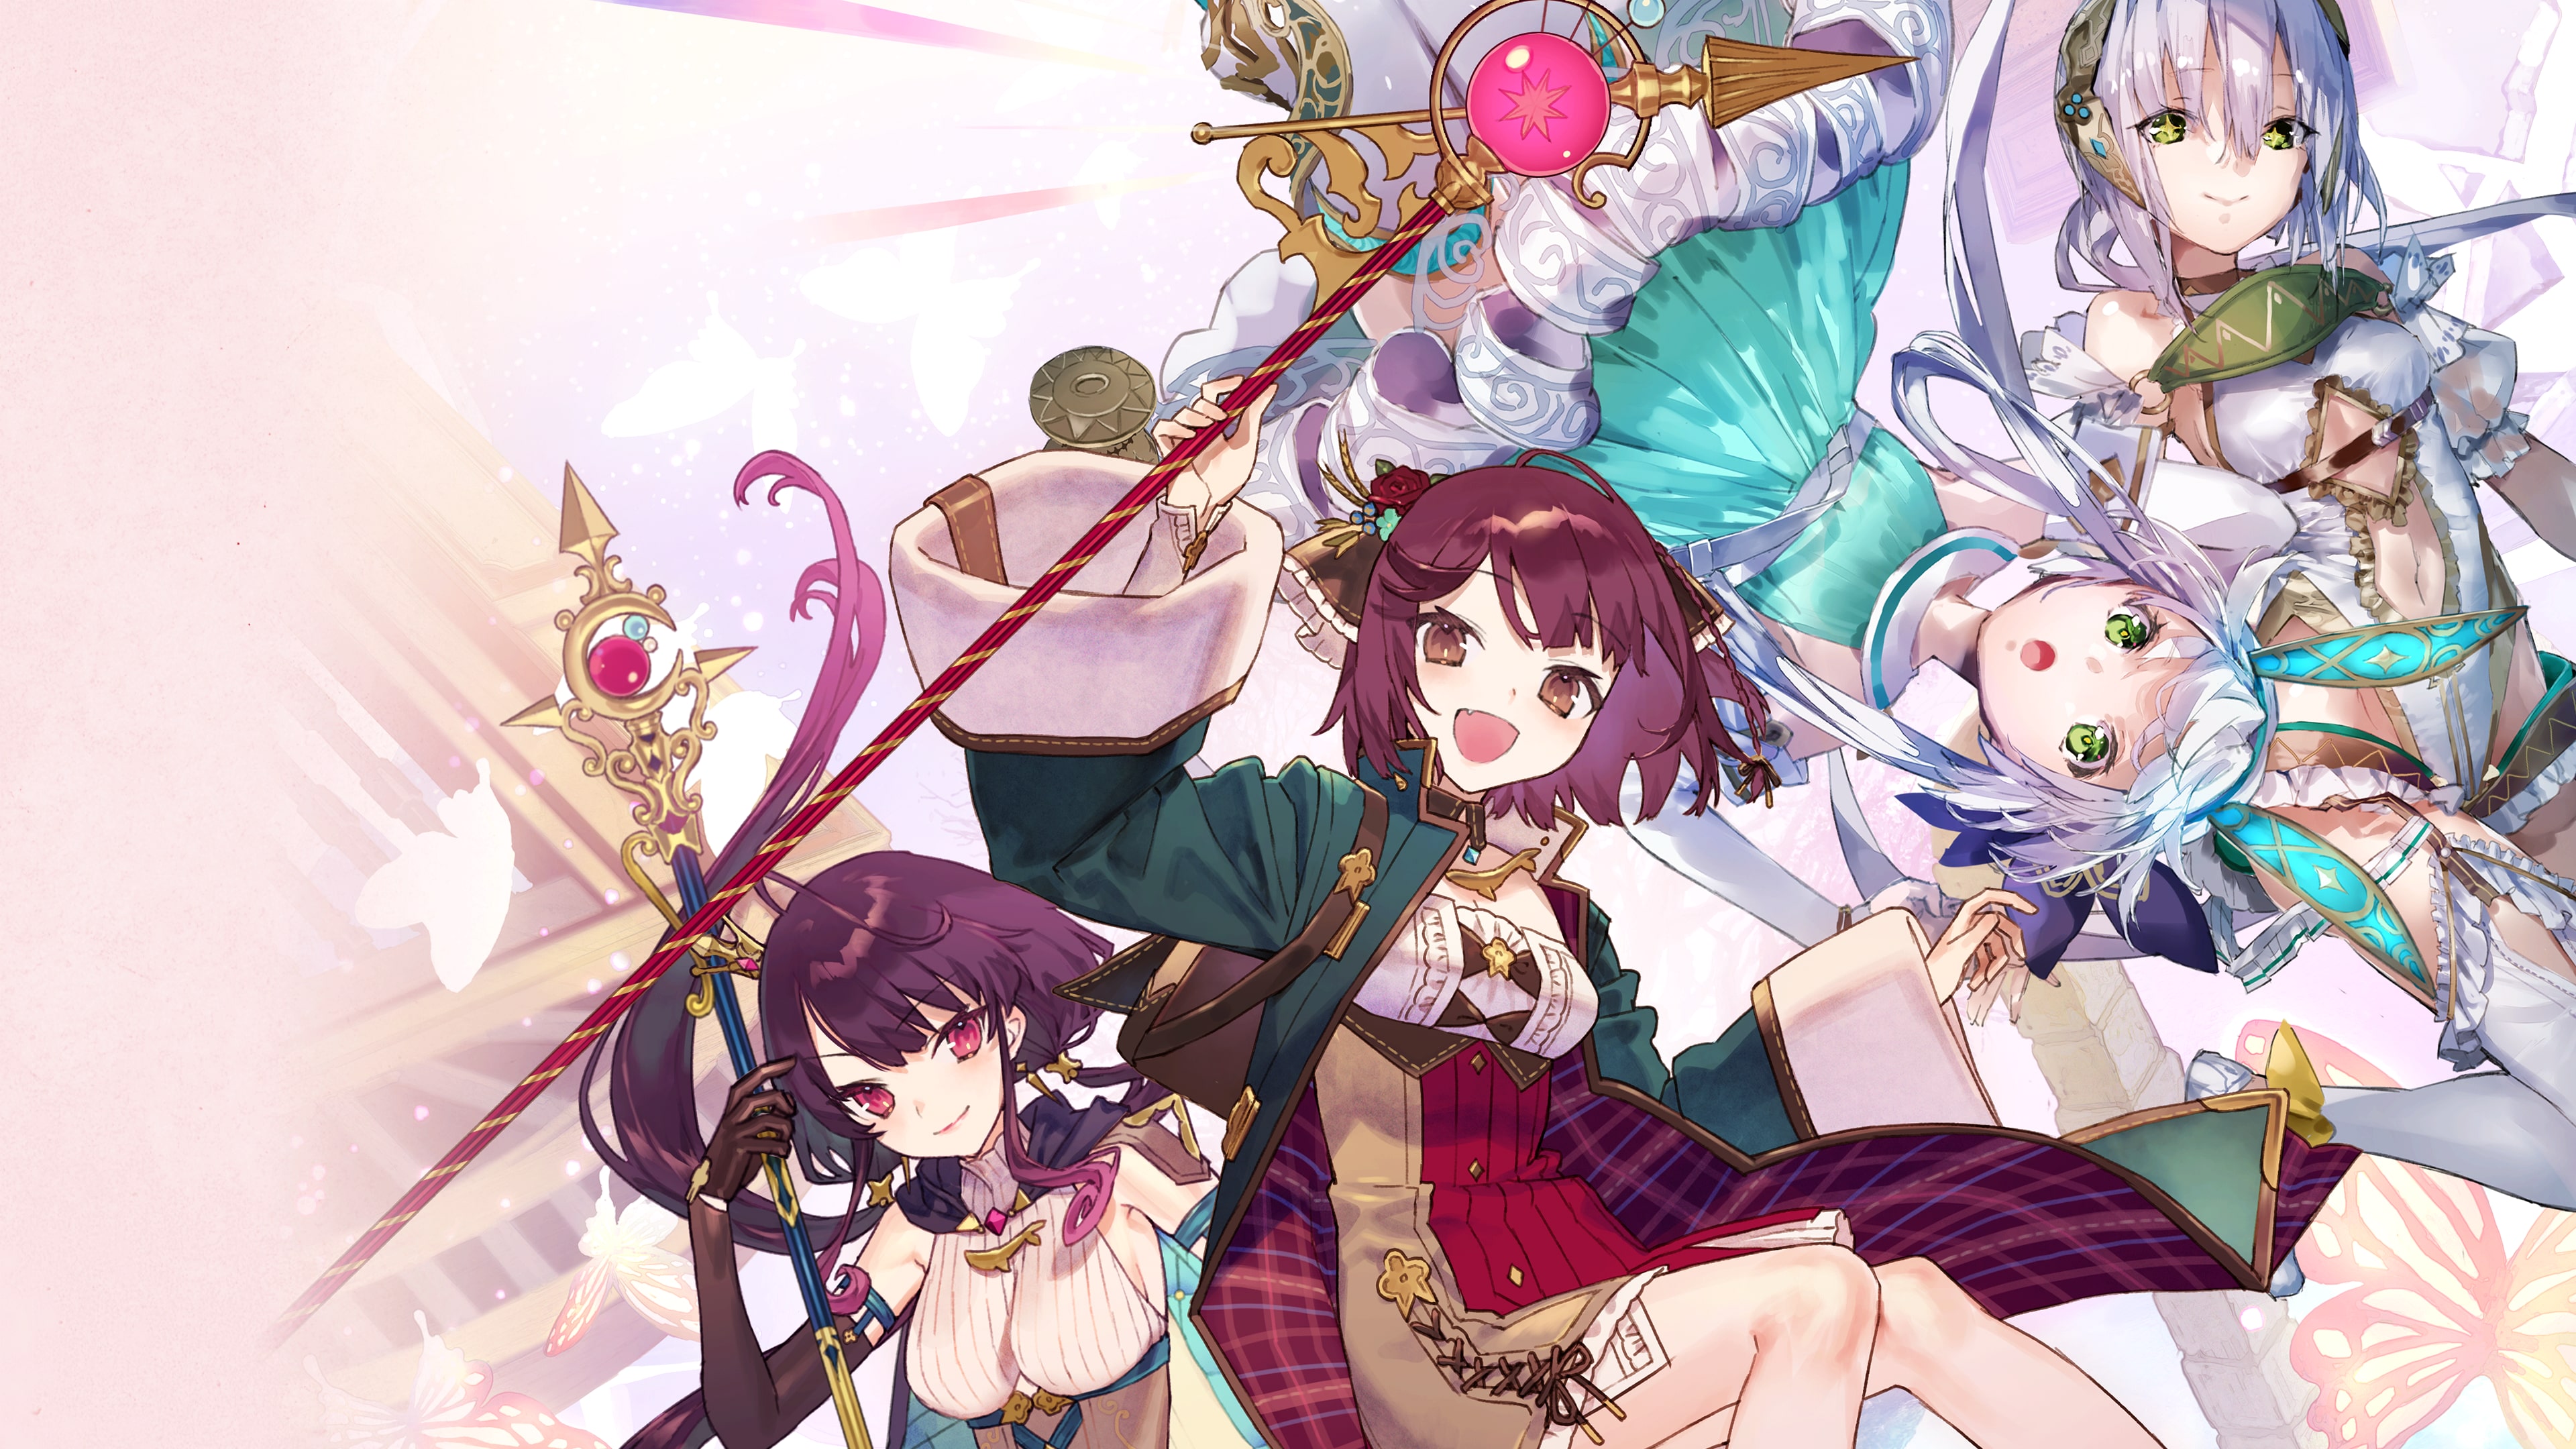 Atelier Sophie 2: The Alchemist of the Mysterious Dream Ultimate Edition (English)